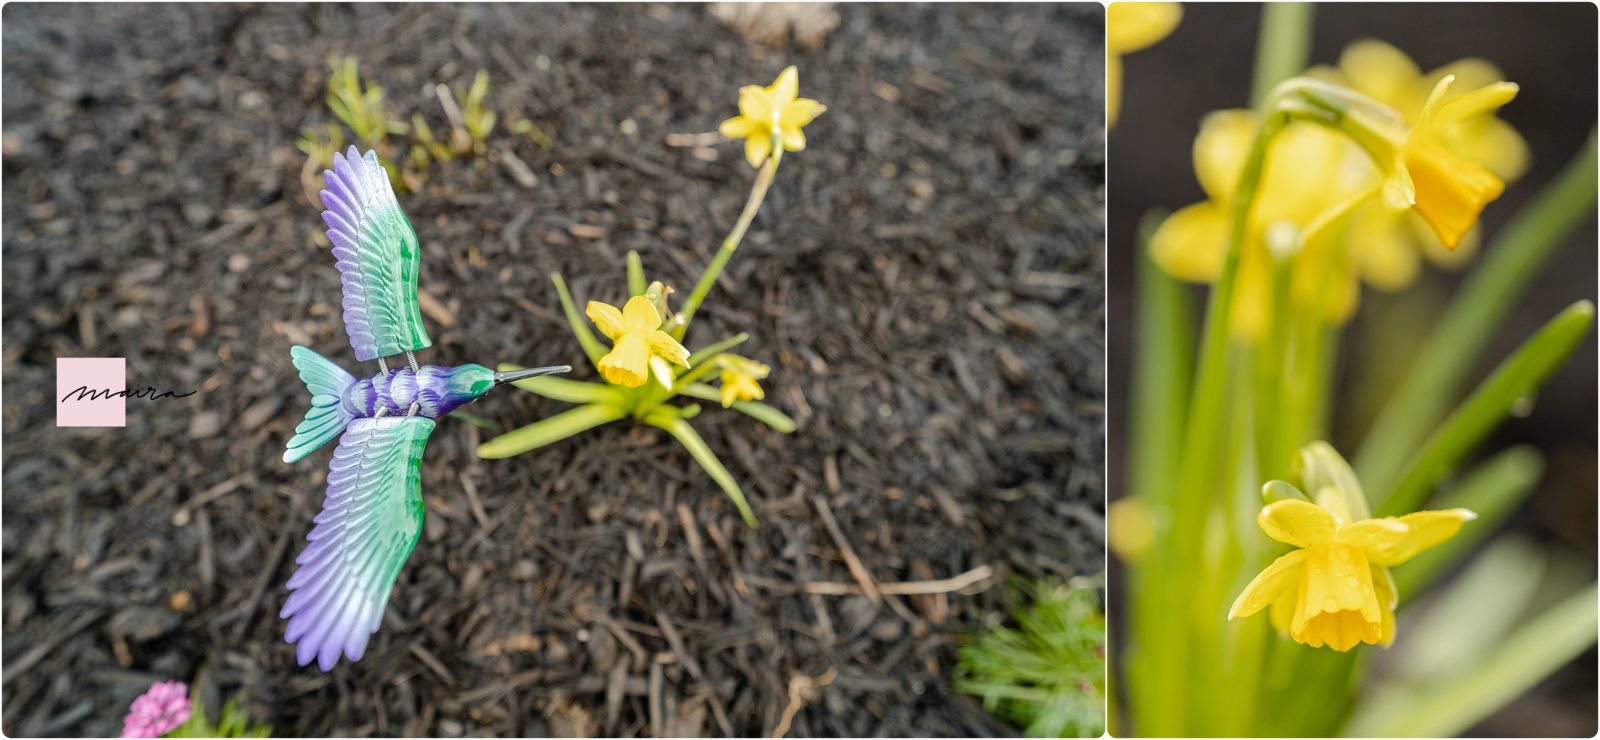 Perennials, Hyacinth, Daffodil, Dormant plants, before and after growth photos, Spring flowers, annabelle hydrangeas, Sage, Lavender, Bloodstone Thrift, bushes